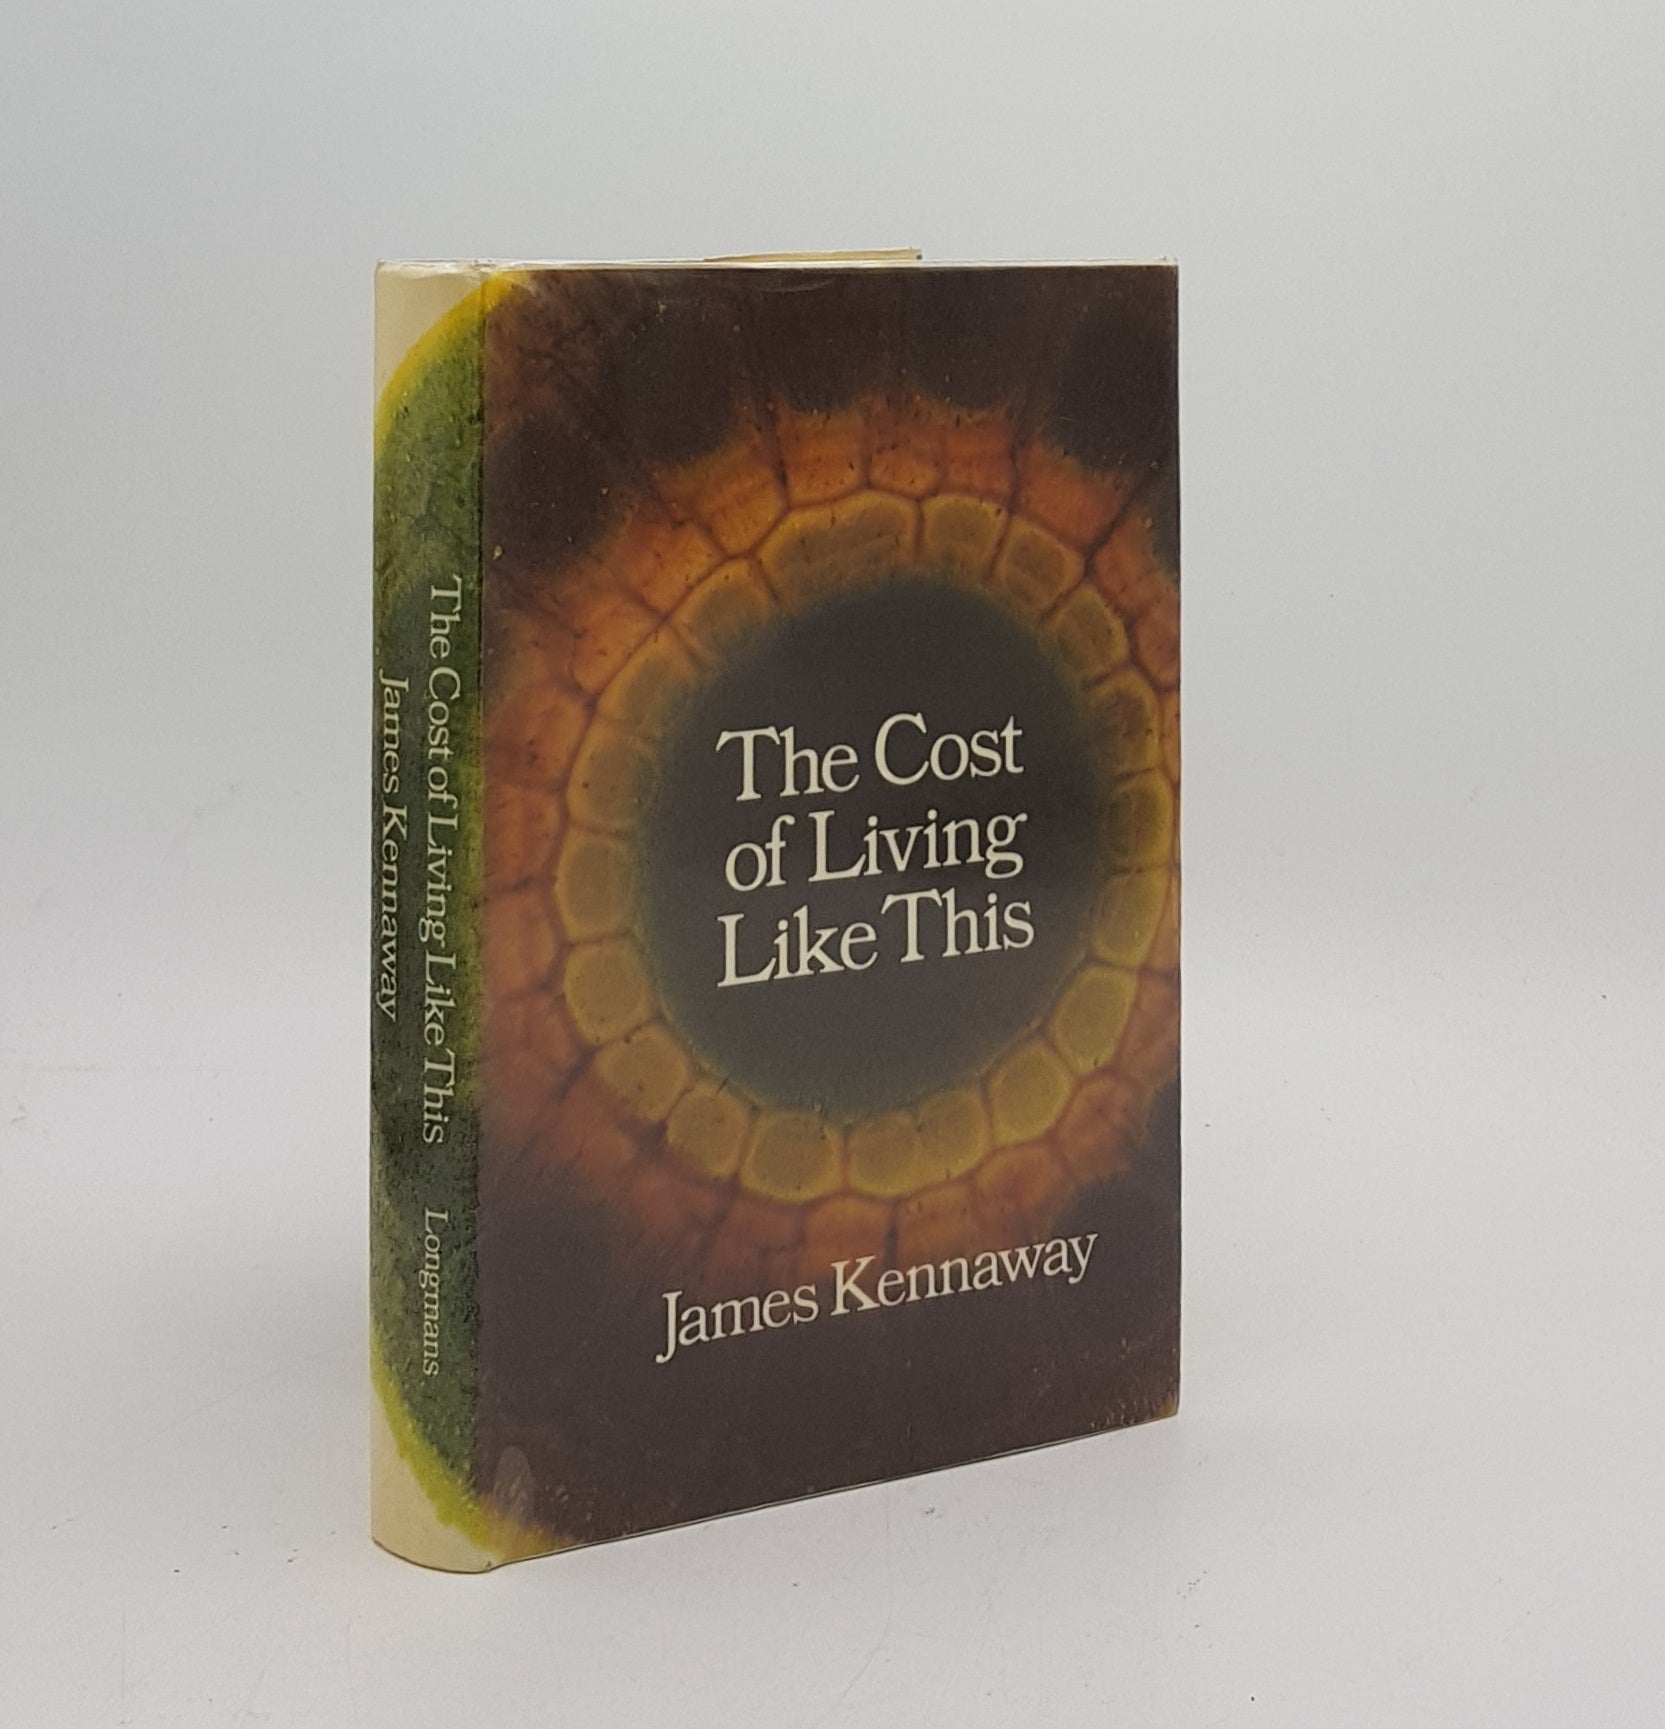 KENNAWAY James - The Cost of Living Like This